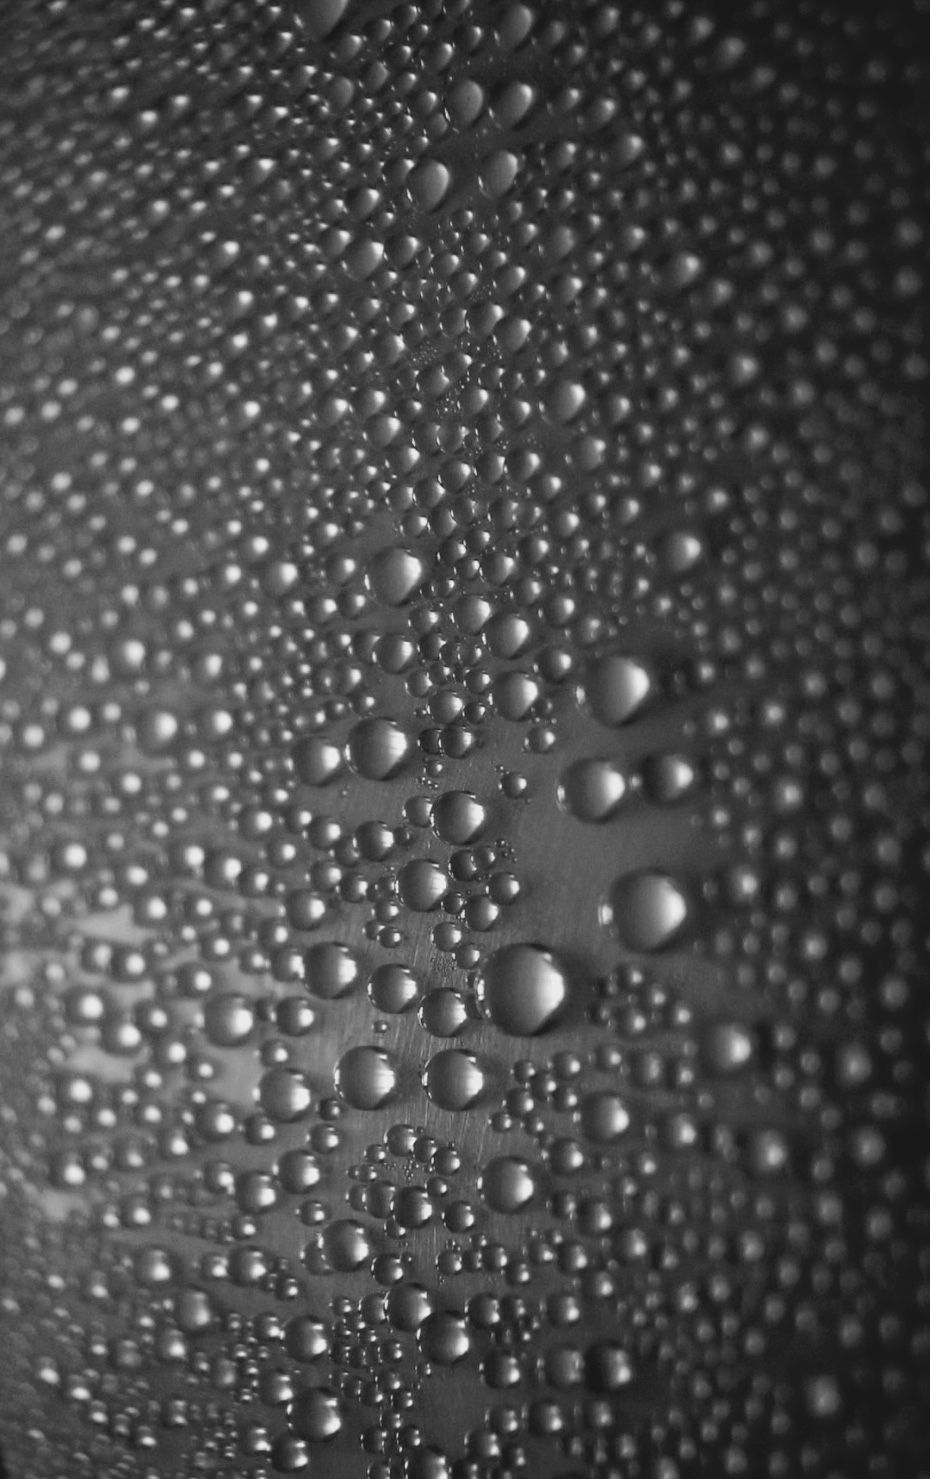 Droplets Texture Background Image Textures Patterns